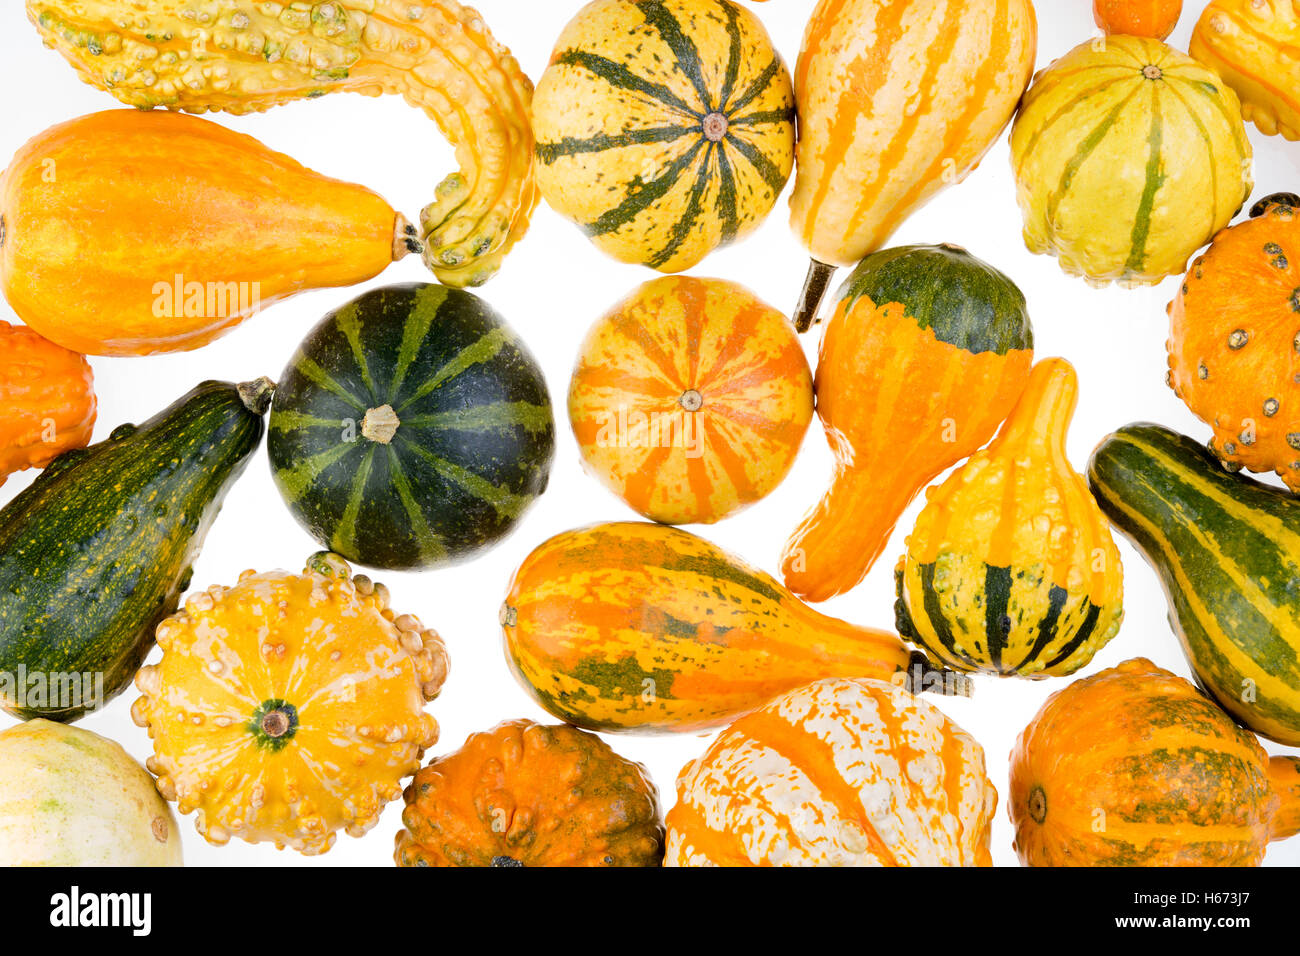 Colorful background of ornamental autumn gourds, pumpkins and squash with assorted shapes, textures, and variegated colors neatl Stock Photo